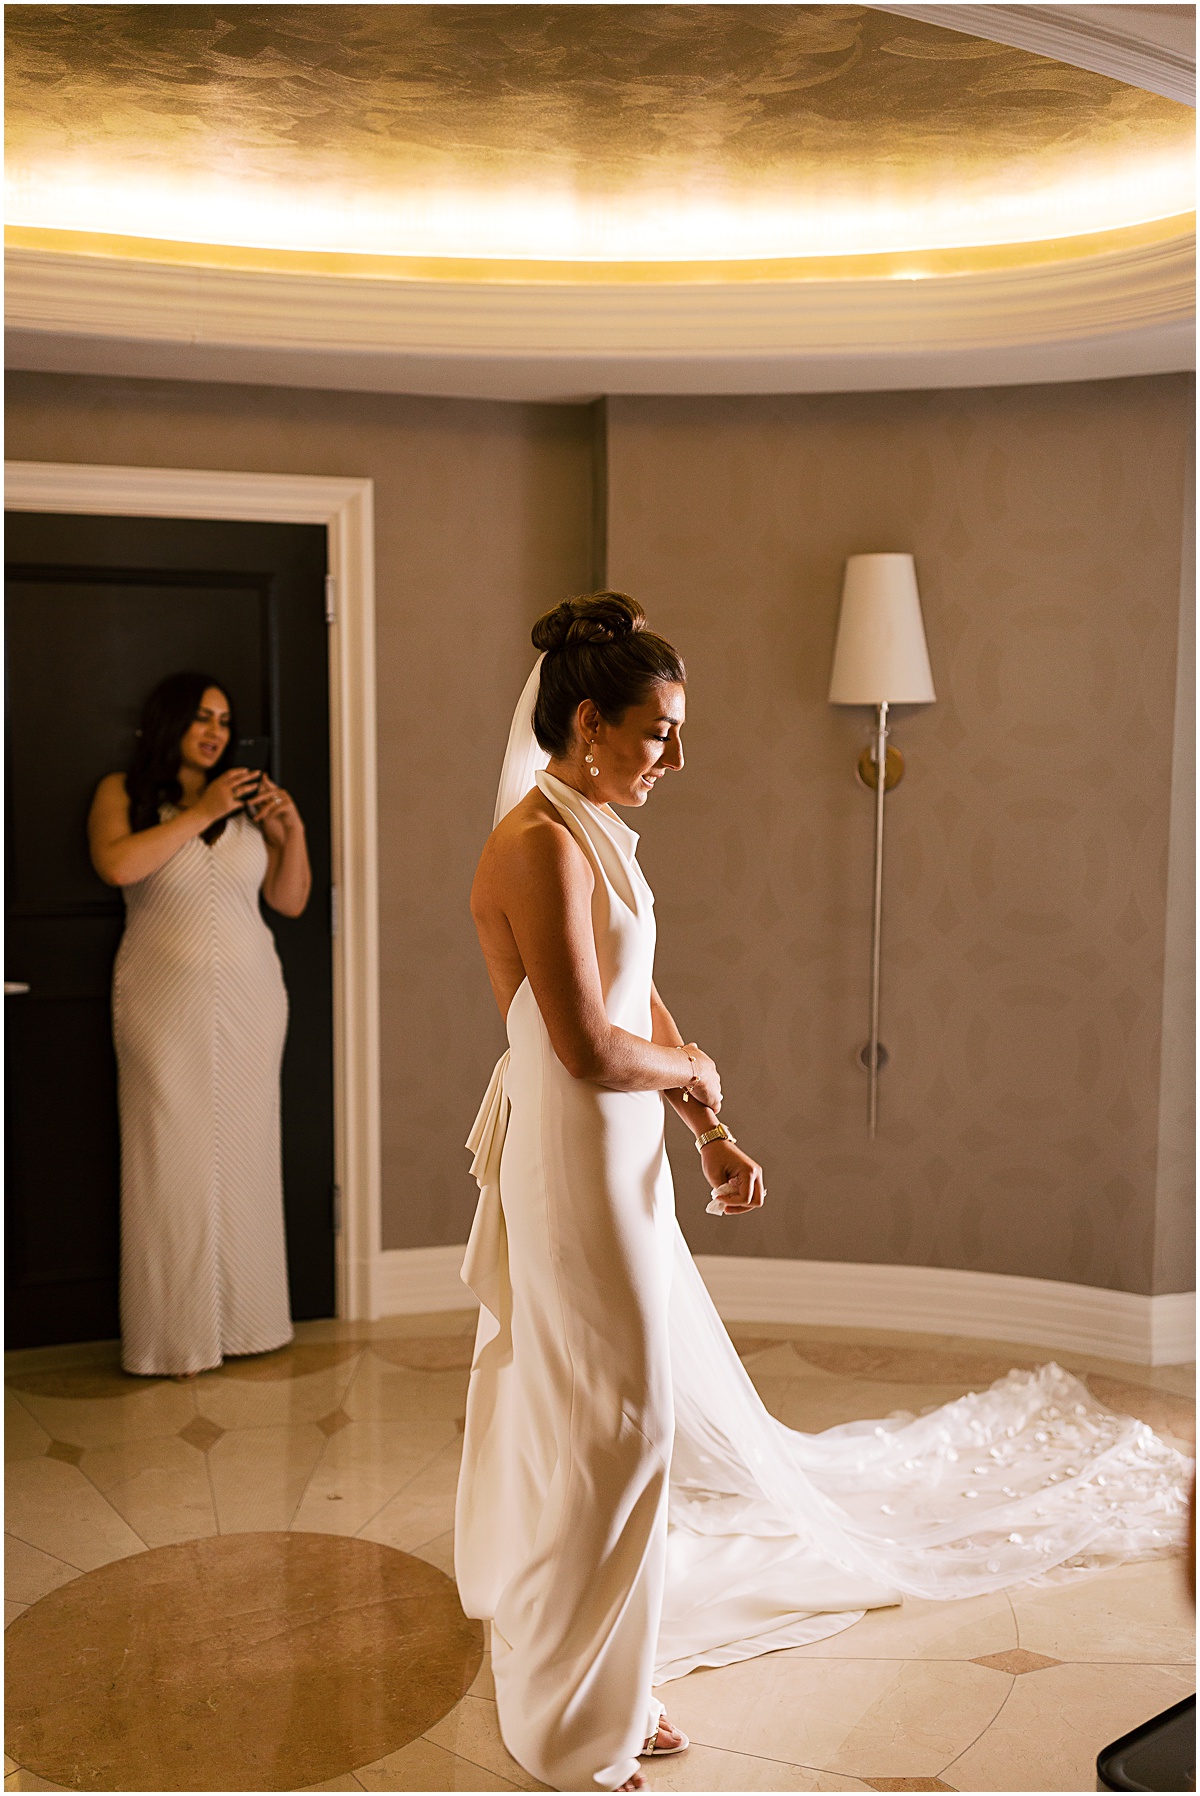 Oscar de la Renta bride getting ready at The Mayflower Hotel DC |  | The 10 Best DC Hotels for  Getting Ready on Your Wedding Day